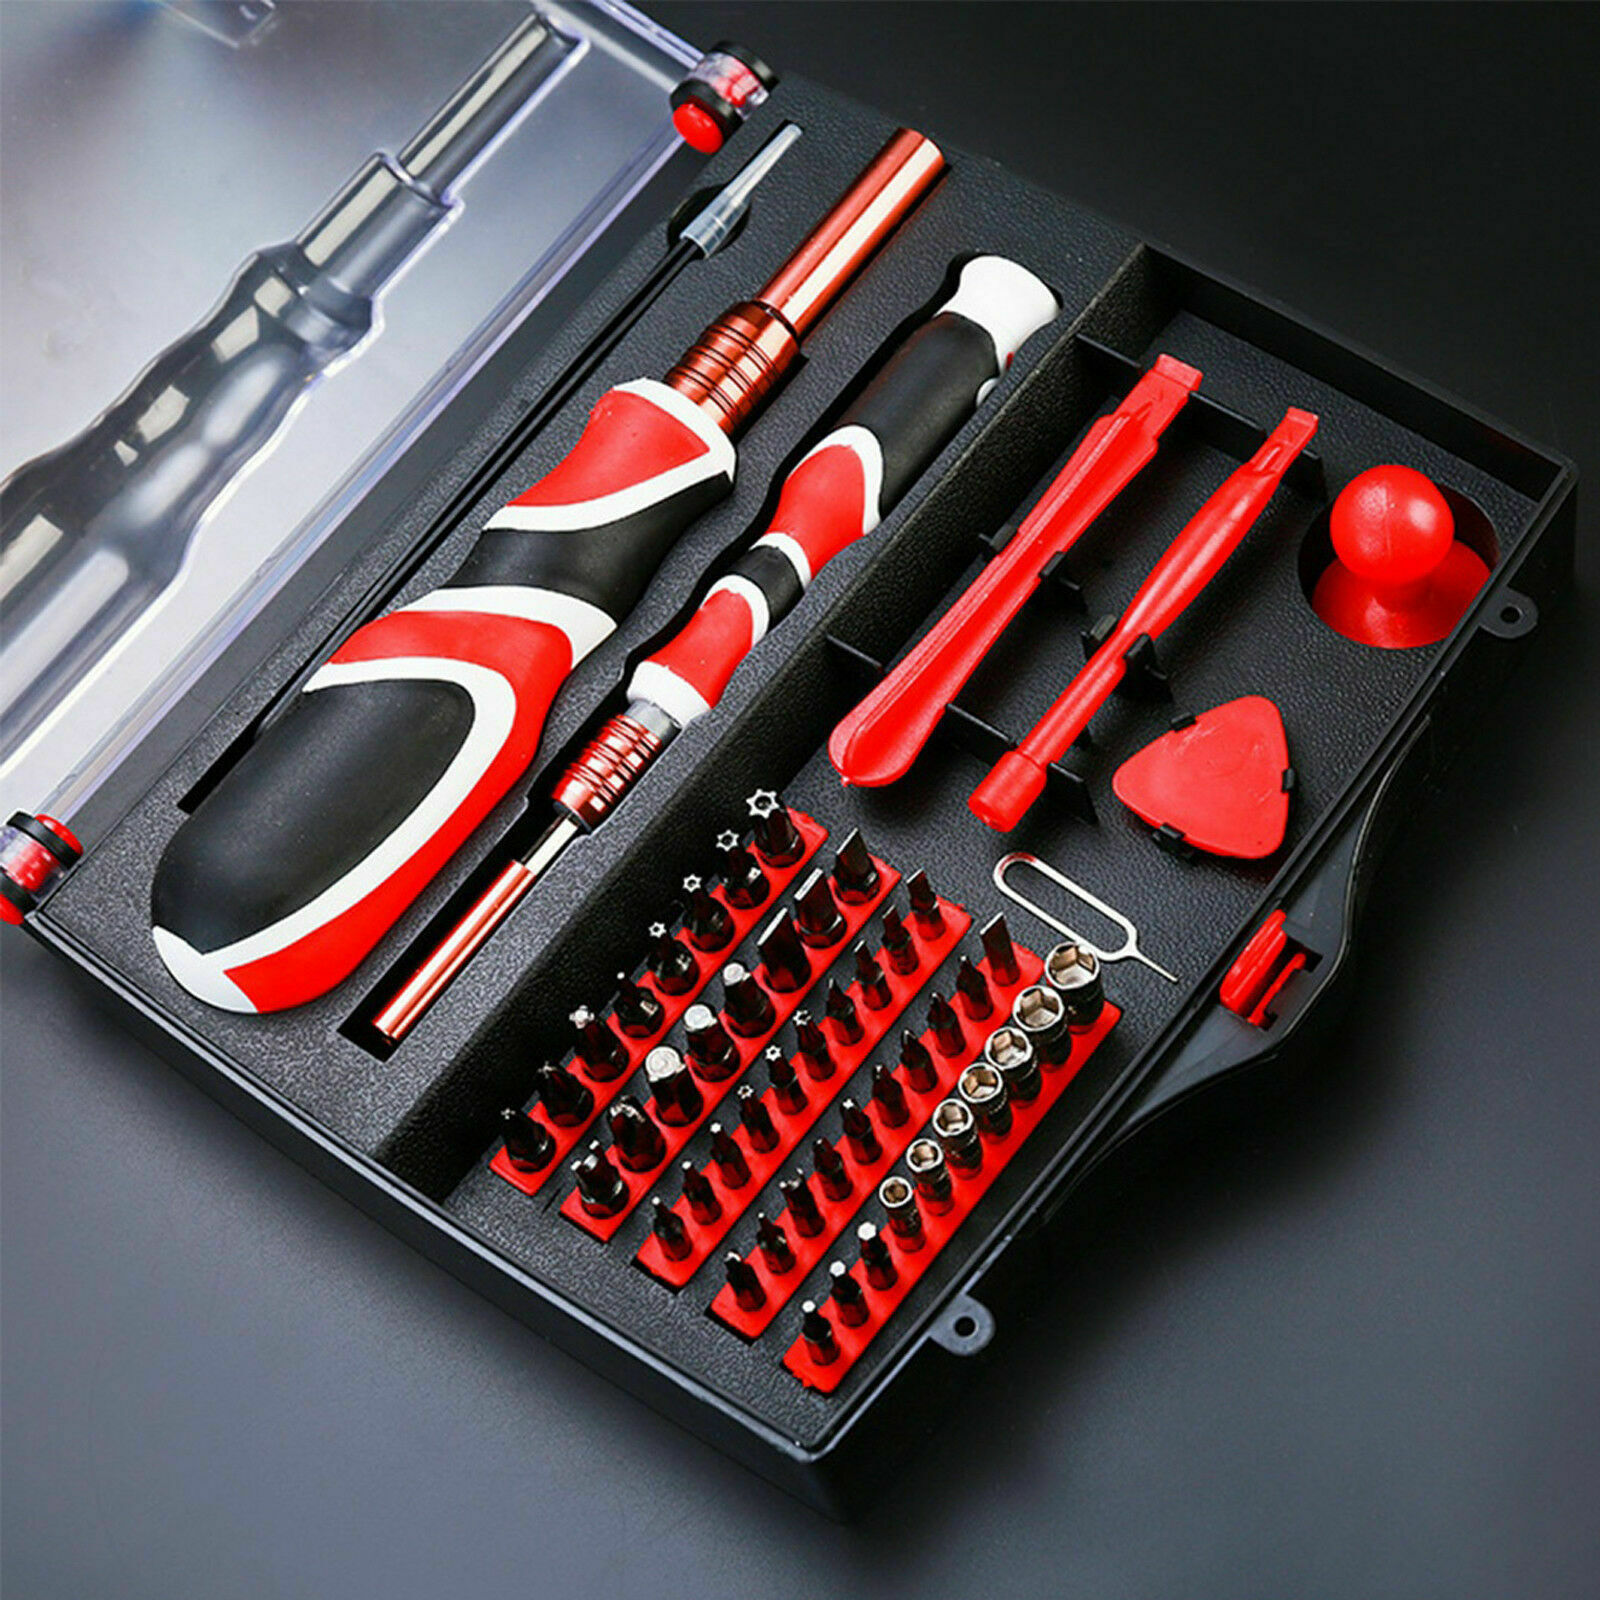 56Pcs Multi Functional Precision Insulated Screwdriver Set Large Small Hex Torx